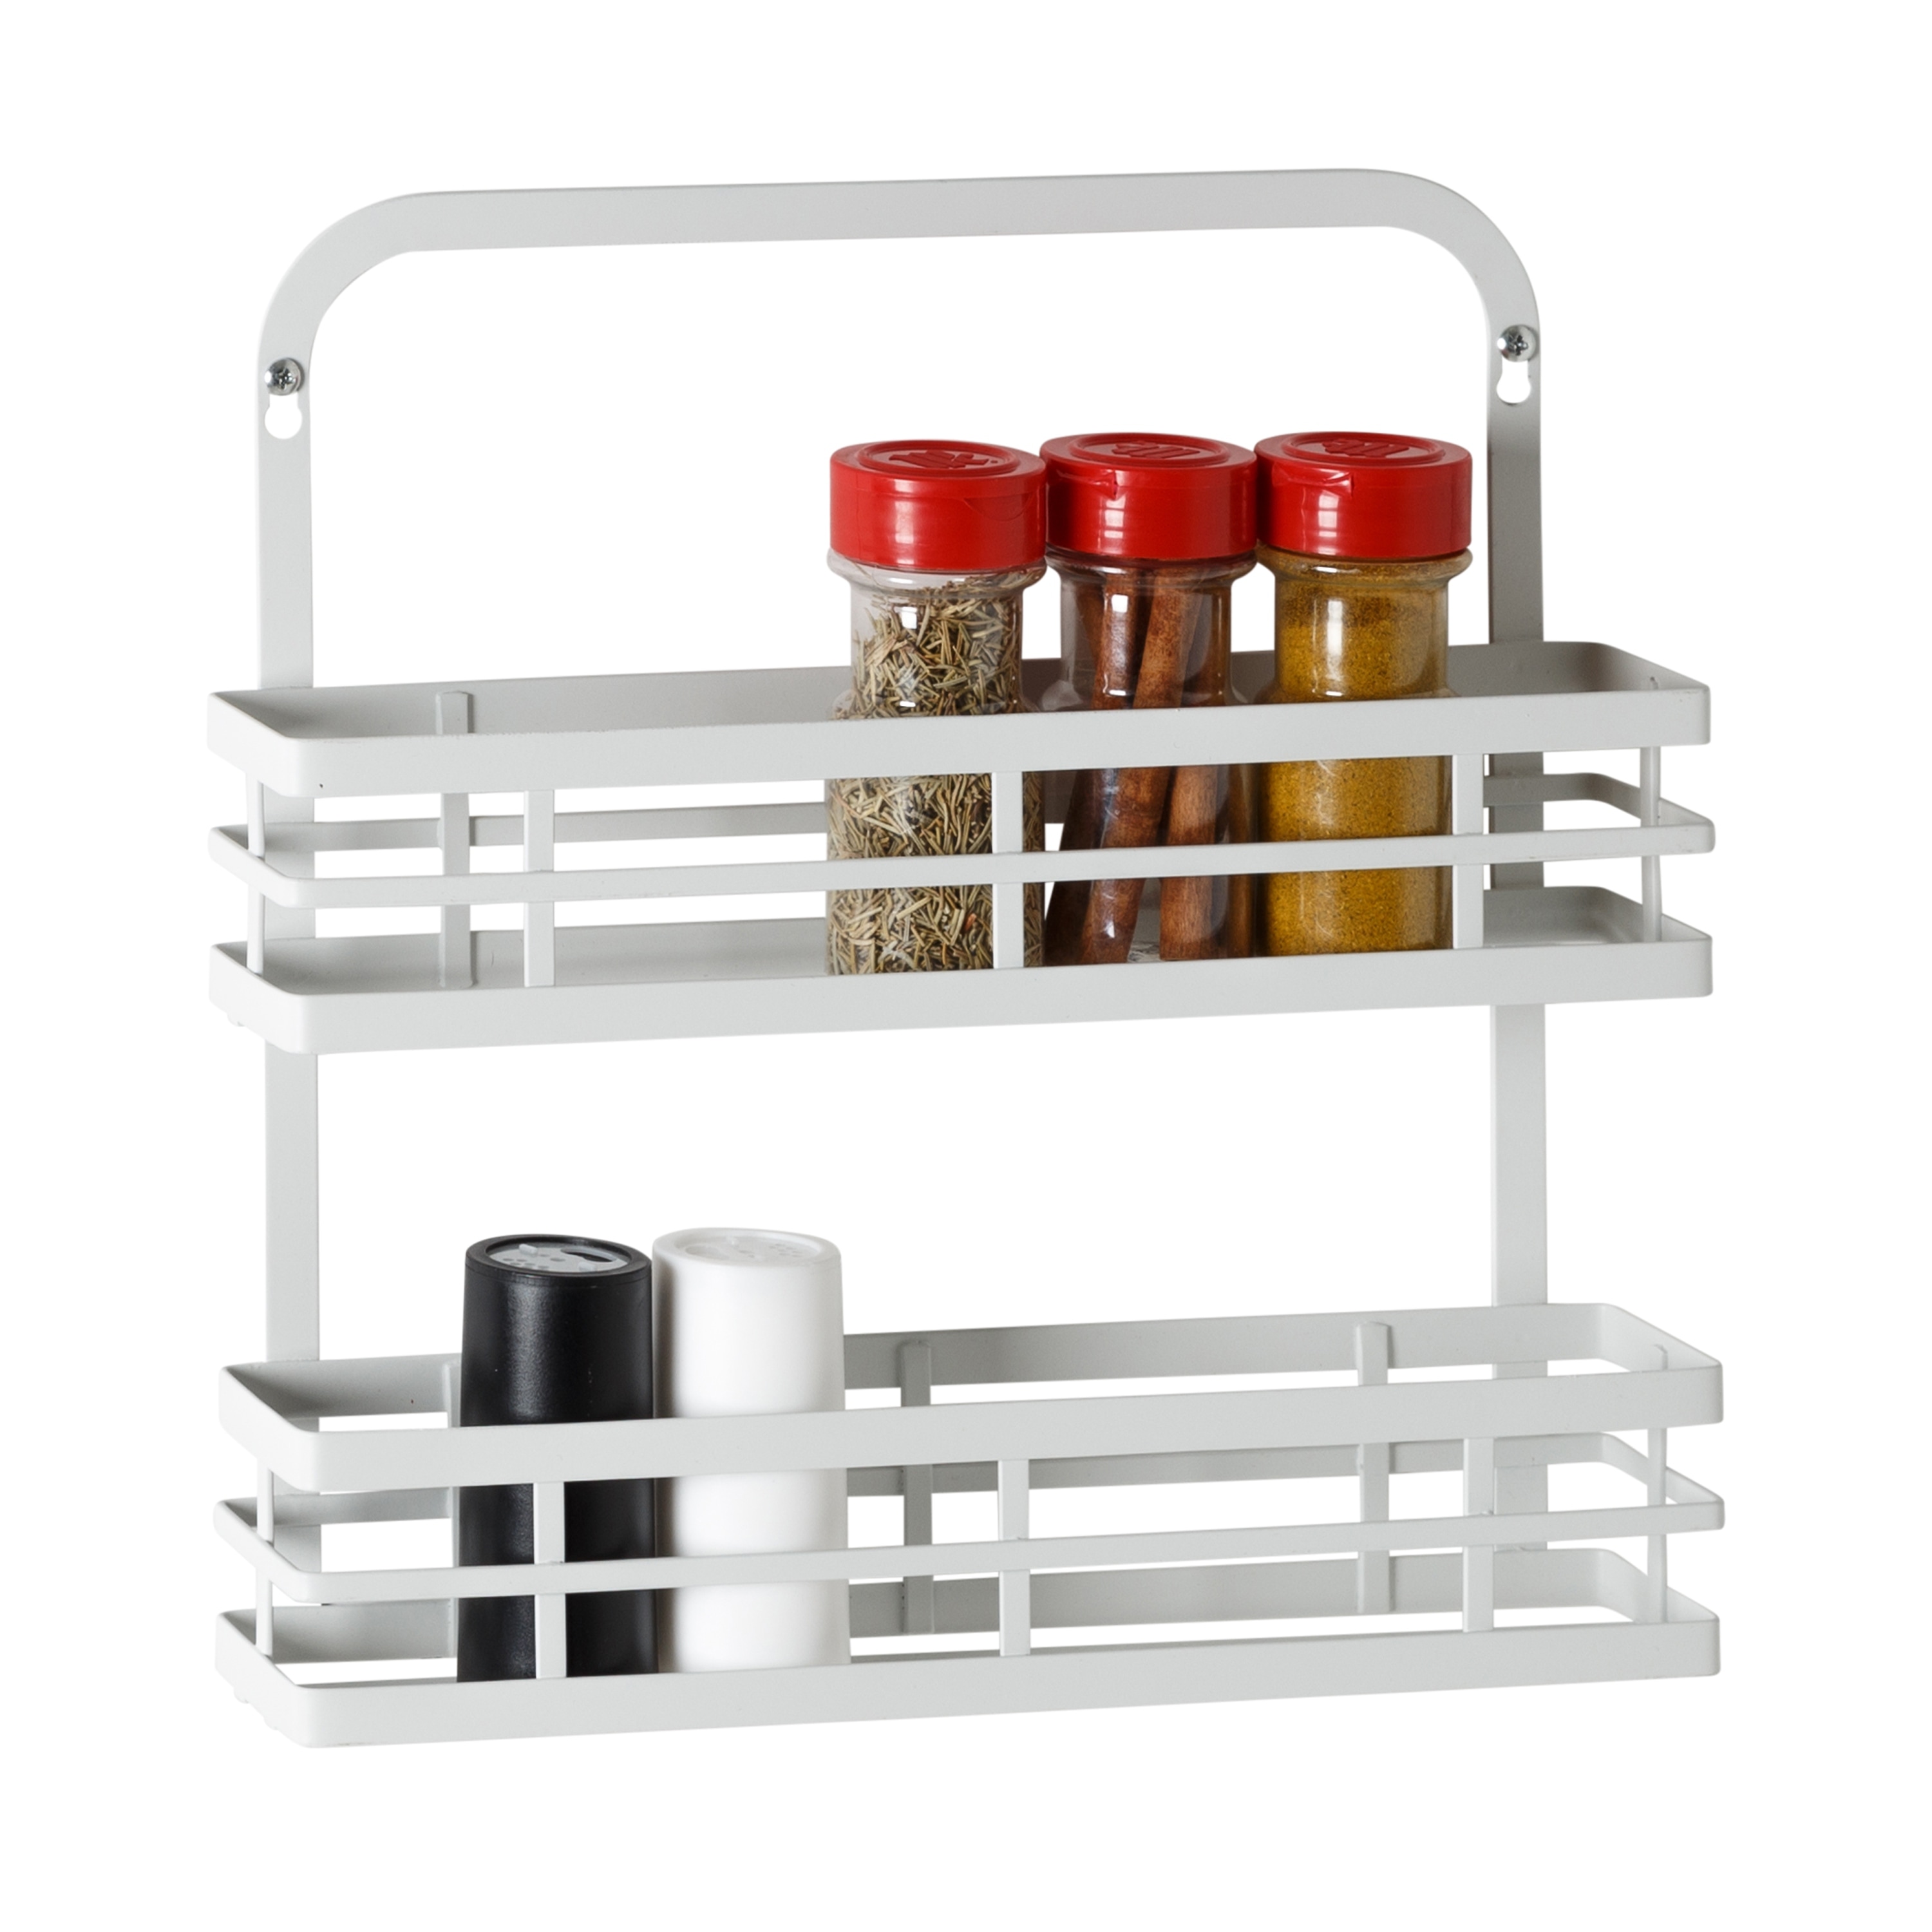 S-Box™ Spice Organization Pop-Up - Stainless Top CLEARANCE